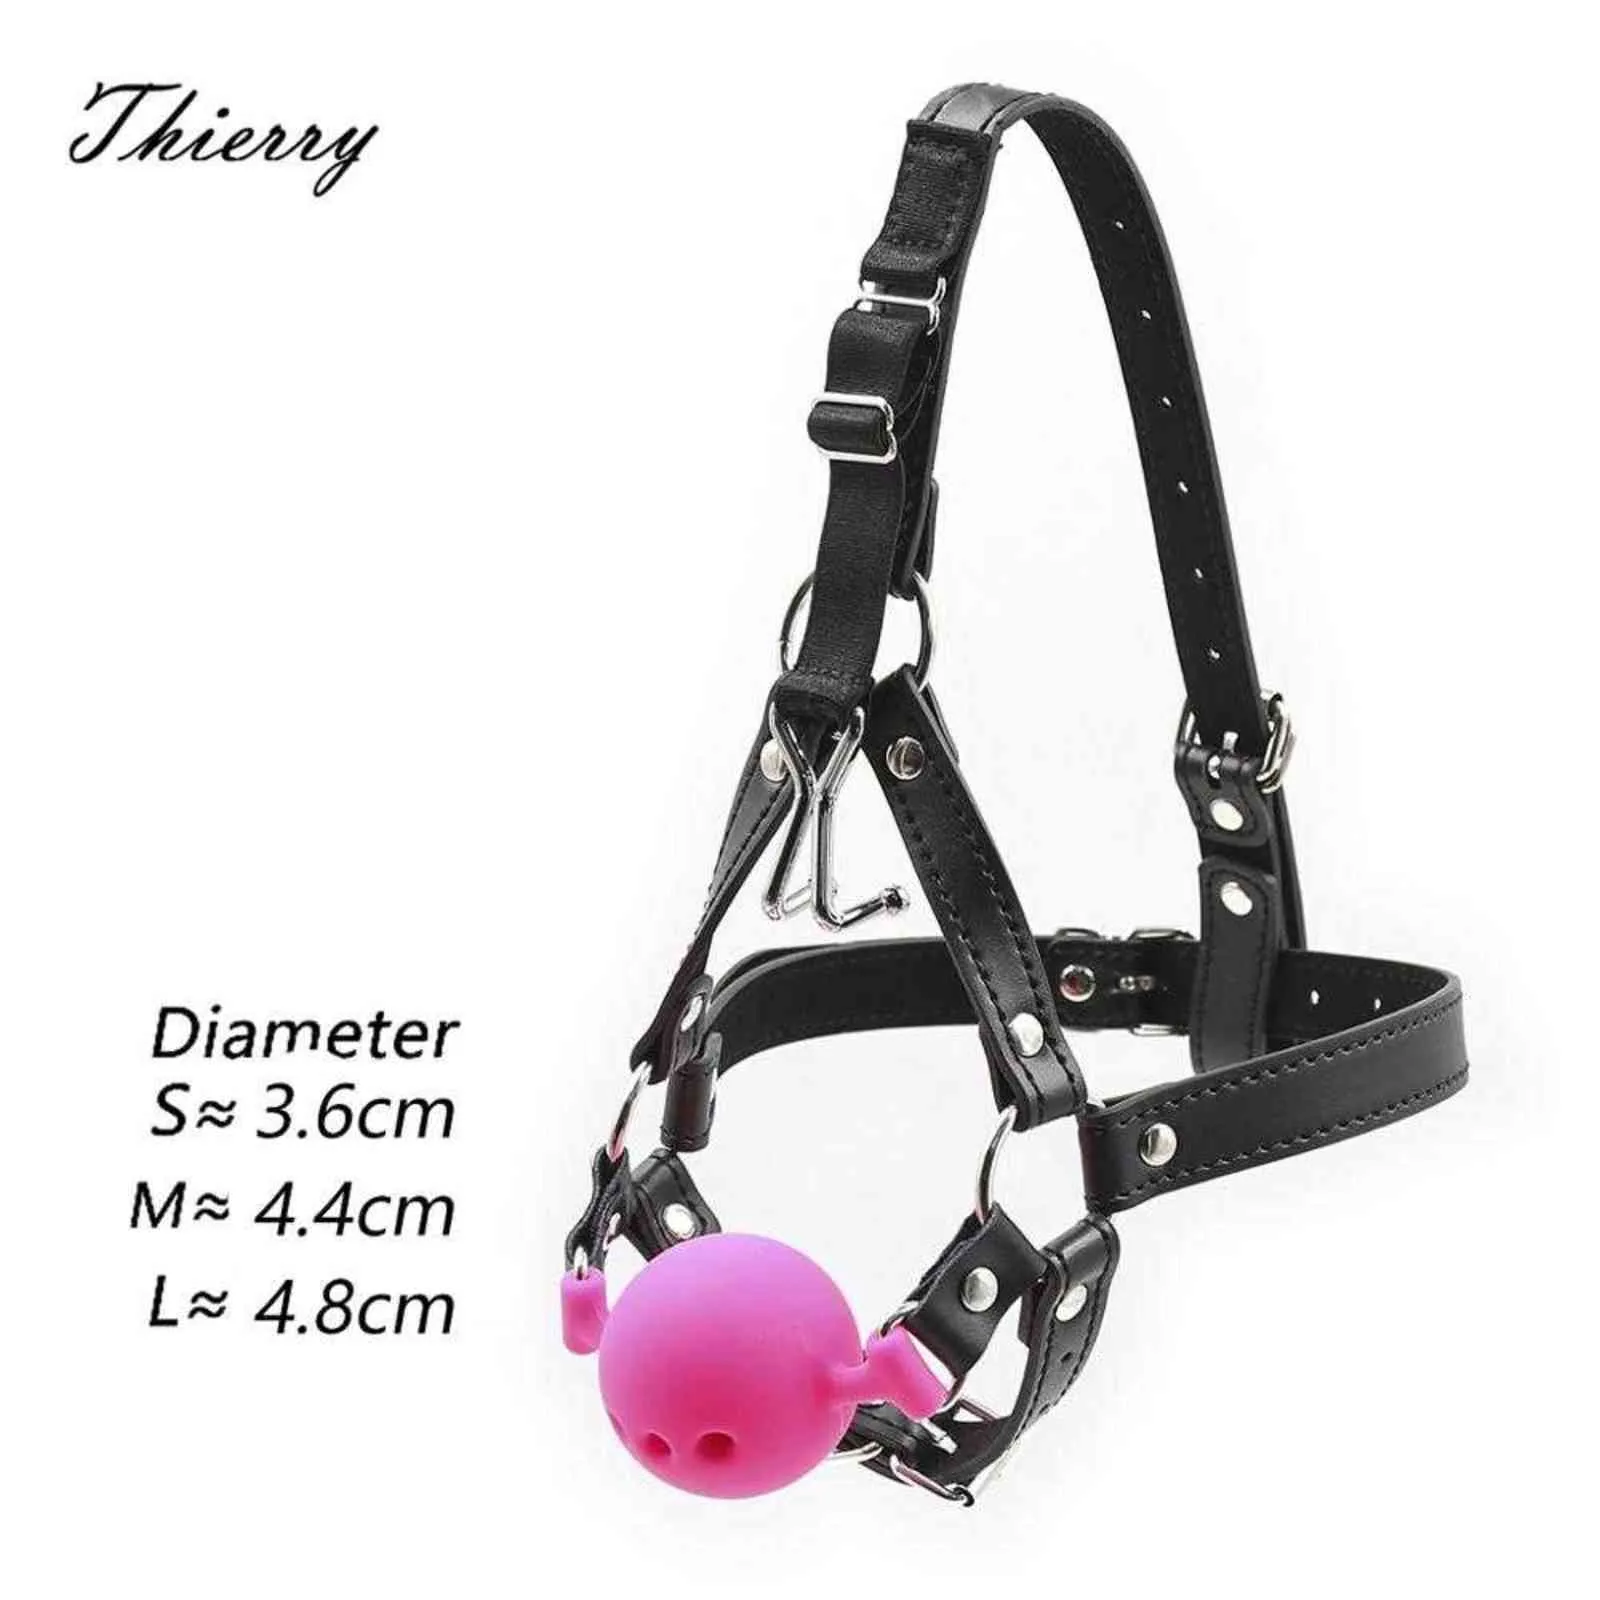 NXY Adult toys Thierry Head Harness with Nose Hook Ball Gag Fetish SM Restraint Silicone Open Mouth Games Products Sex Toys Shop 1201